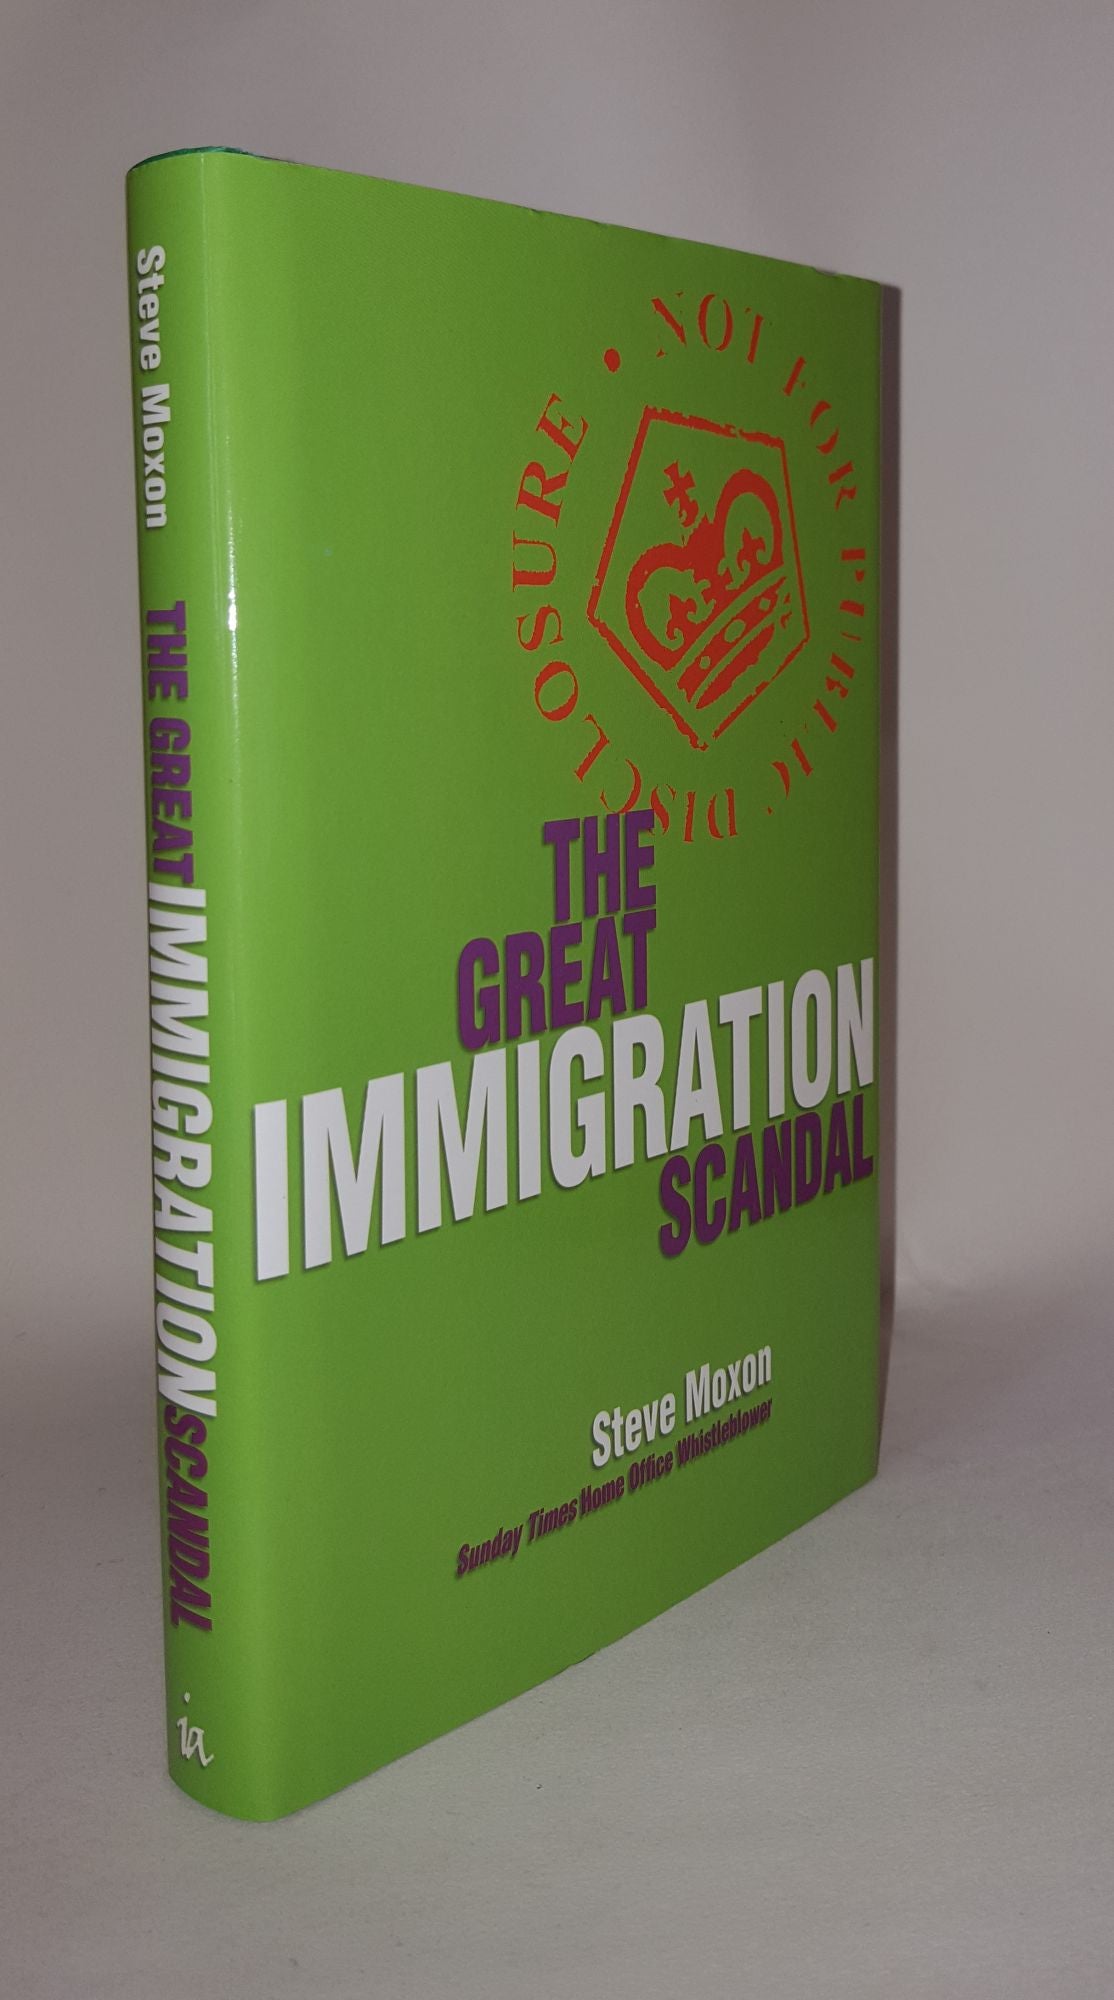 MOXON Steve - The Great Immigration Scandal